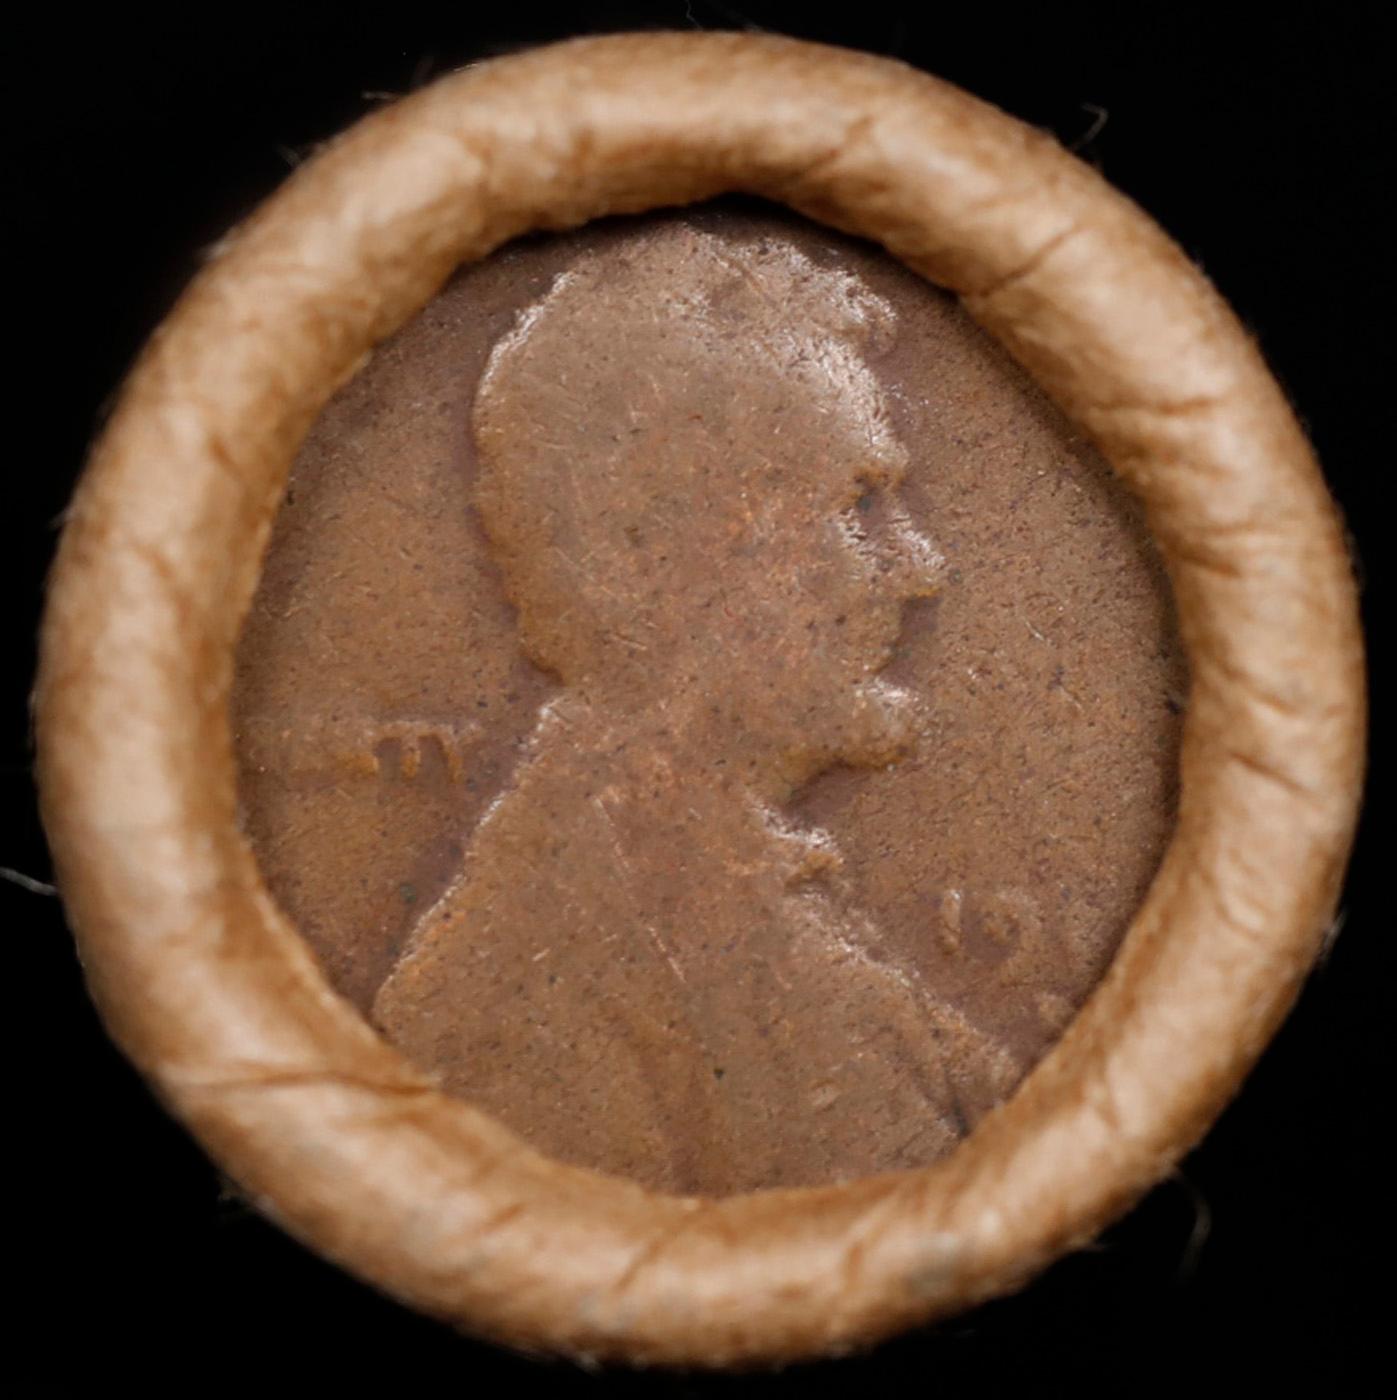 Lincoln Wheat Cent 1c Mixed Roll Orig Brandt McDonalds Wrapper, 1917-d end, Wheat other end